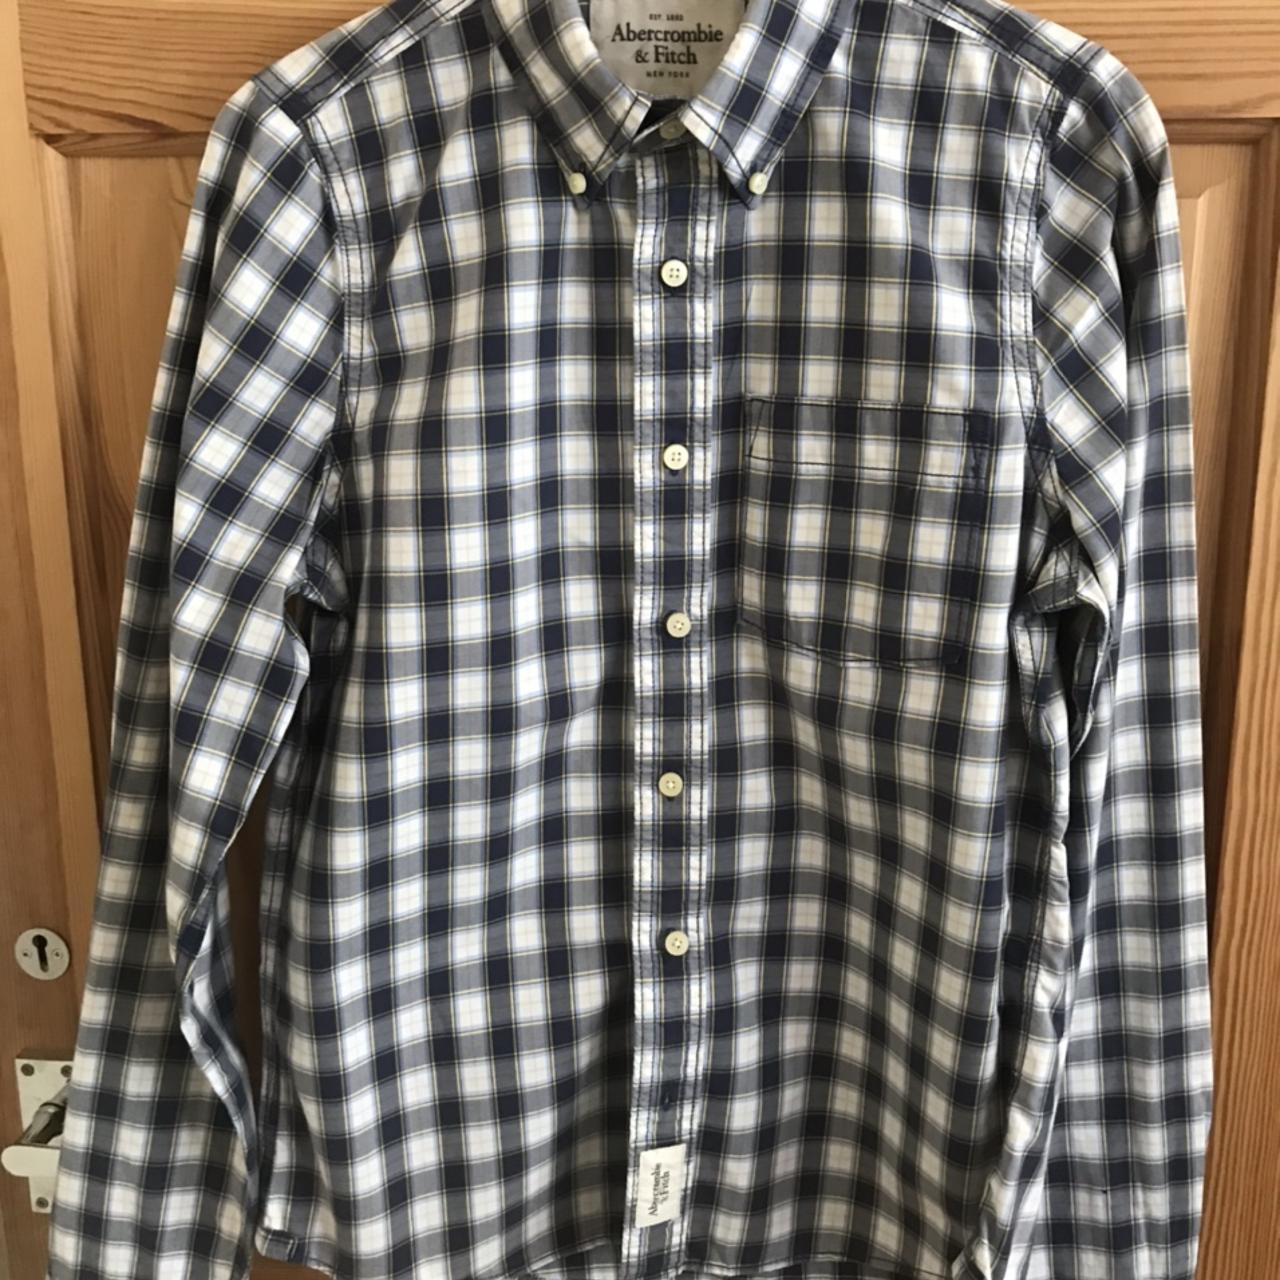 Checked Abercrombie and Fitch long sleeved shirt,... - Depop